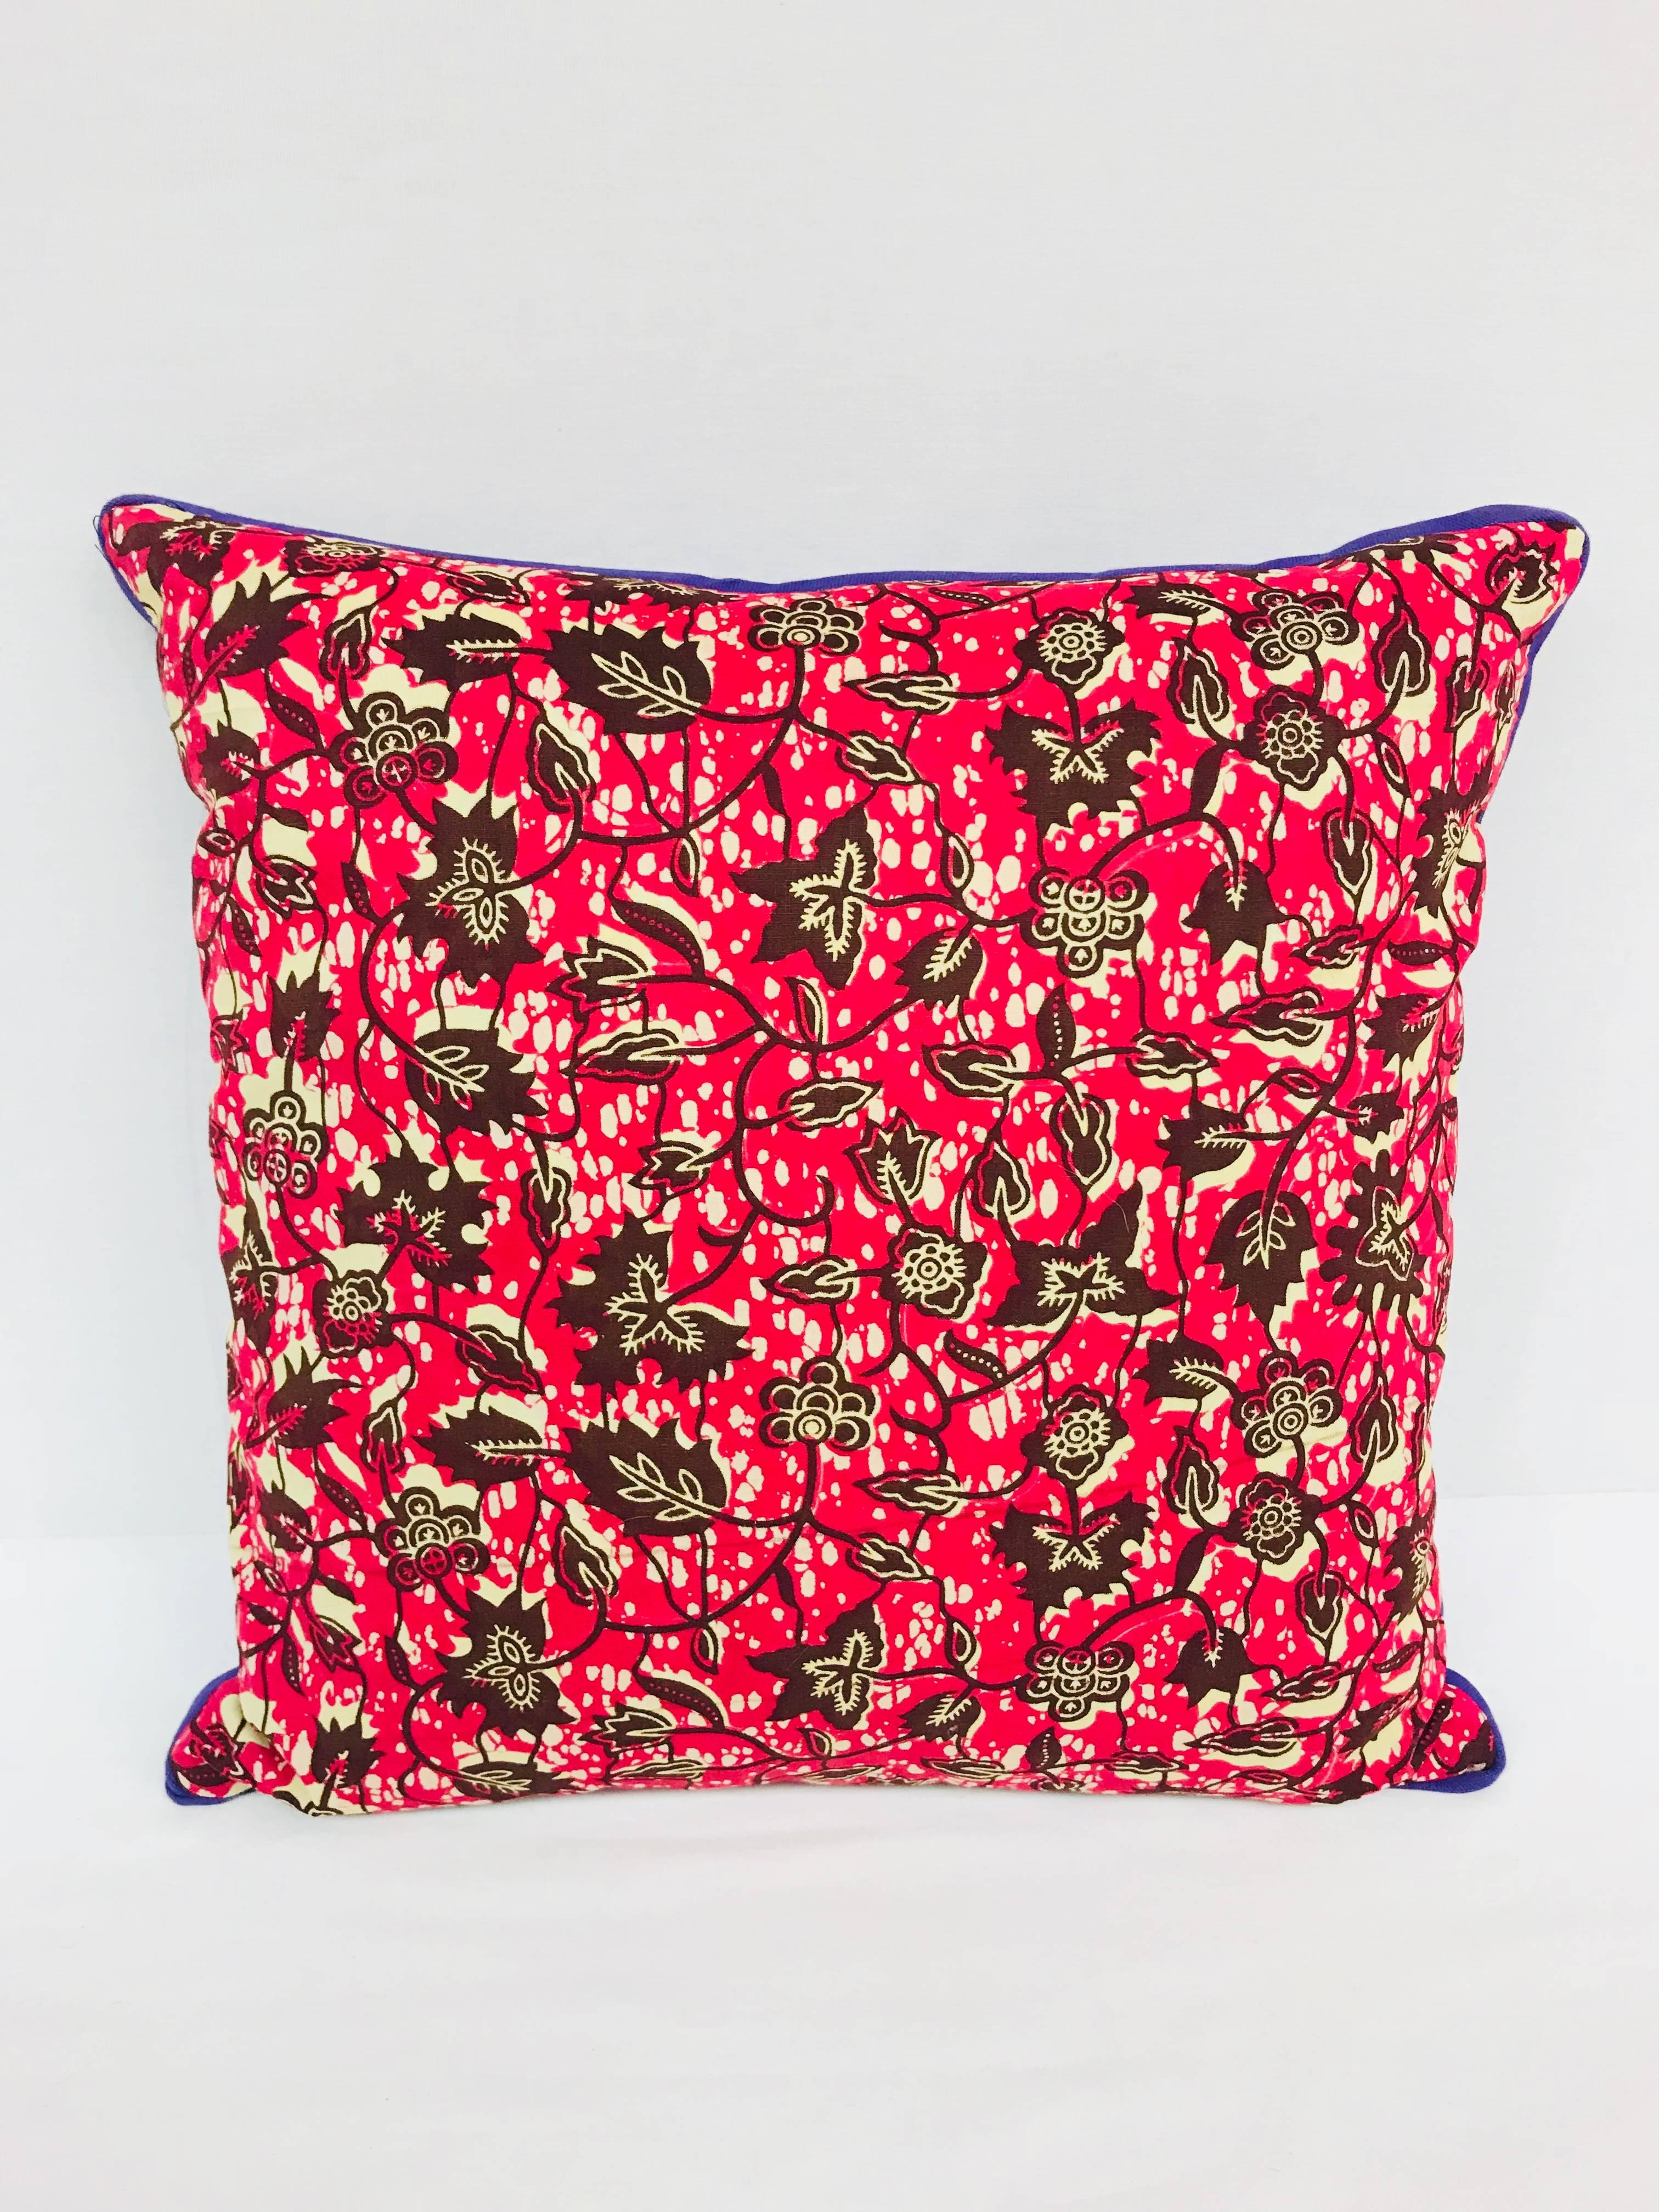 Crafted exclusively for Madcap Cottage in the USA, this African wax print pillow will bring a big dollop of delicious to a neutral sofa, bed, or chair. Backed in a kicky purple hue. Made from Vlisco authentic Dutch Wax fabrics. Hidden zipper. Down